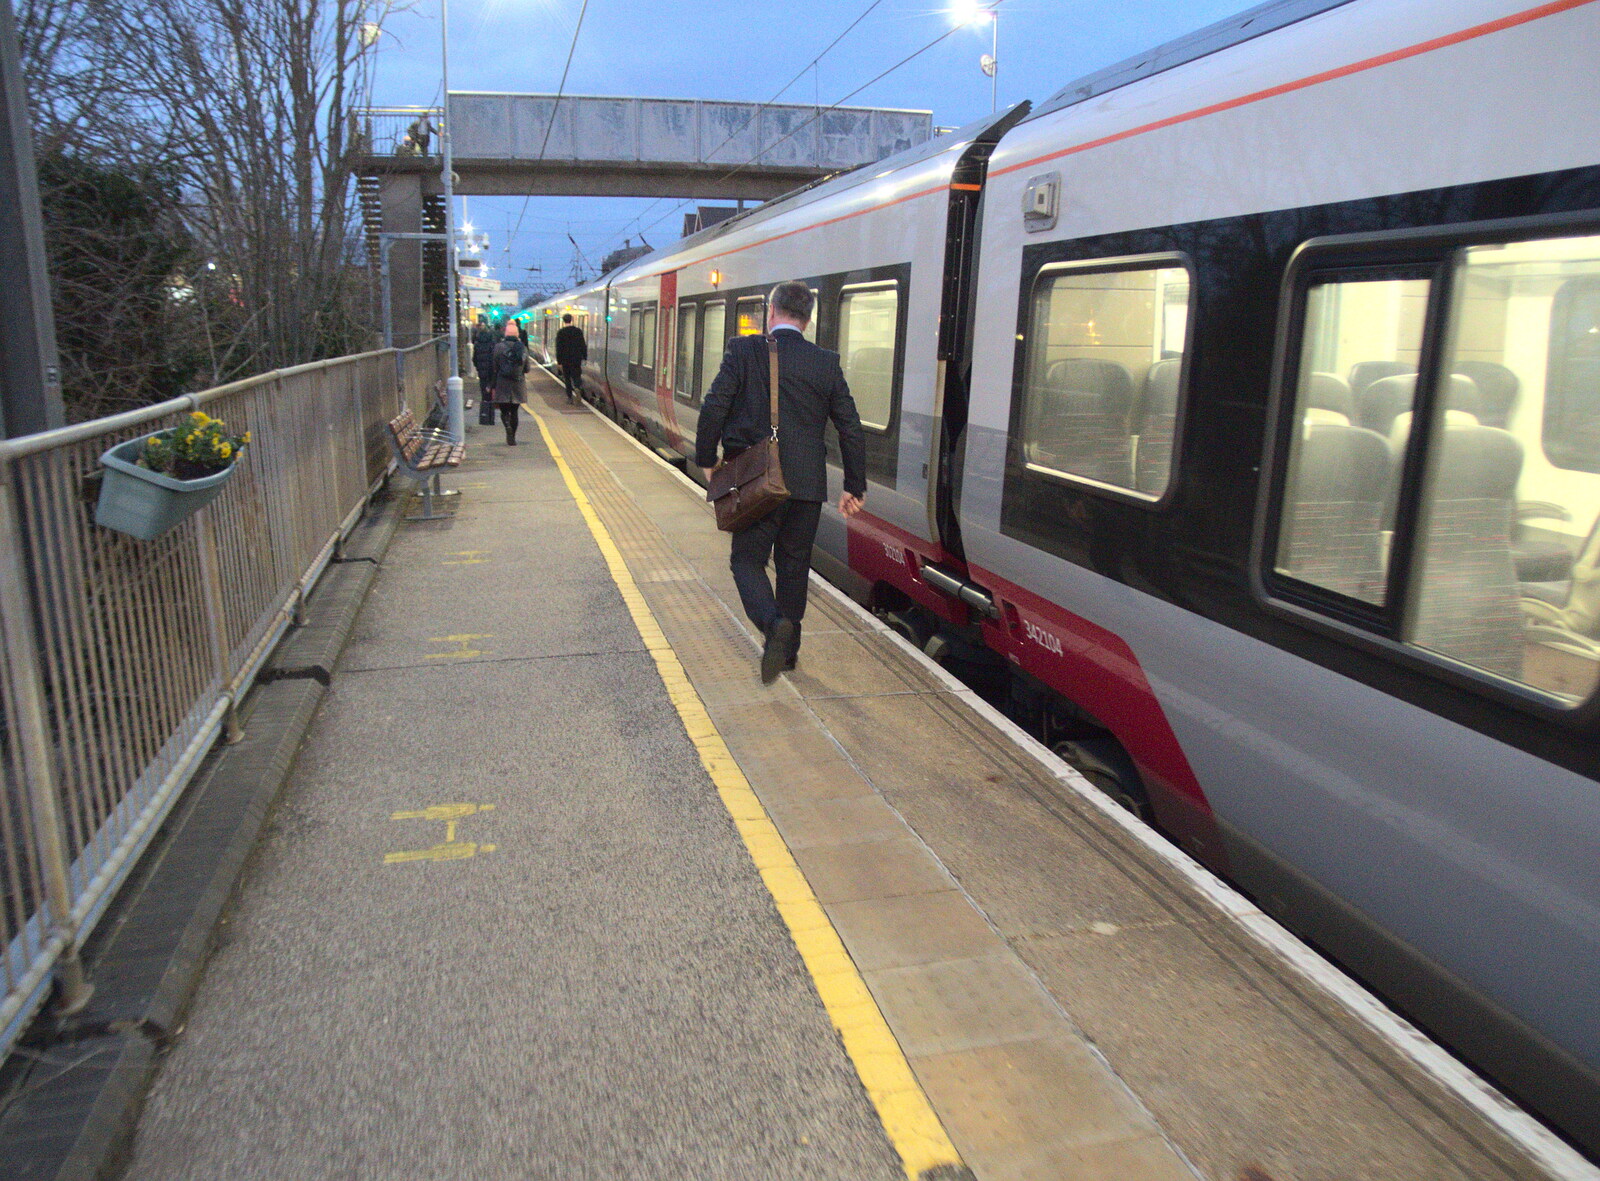 Back at Diss Station from The Last Trip to the SwiftKey Office, Paddington, London - 23rd February 2022